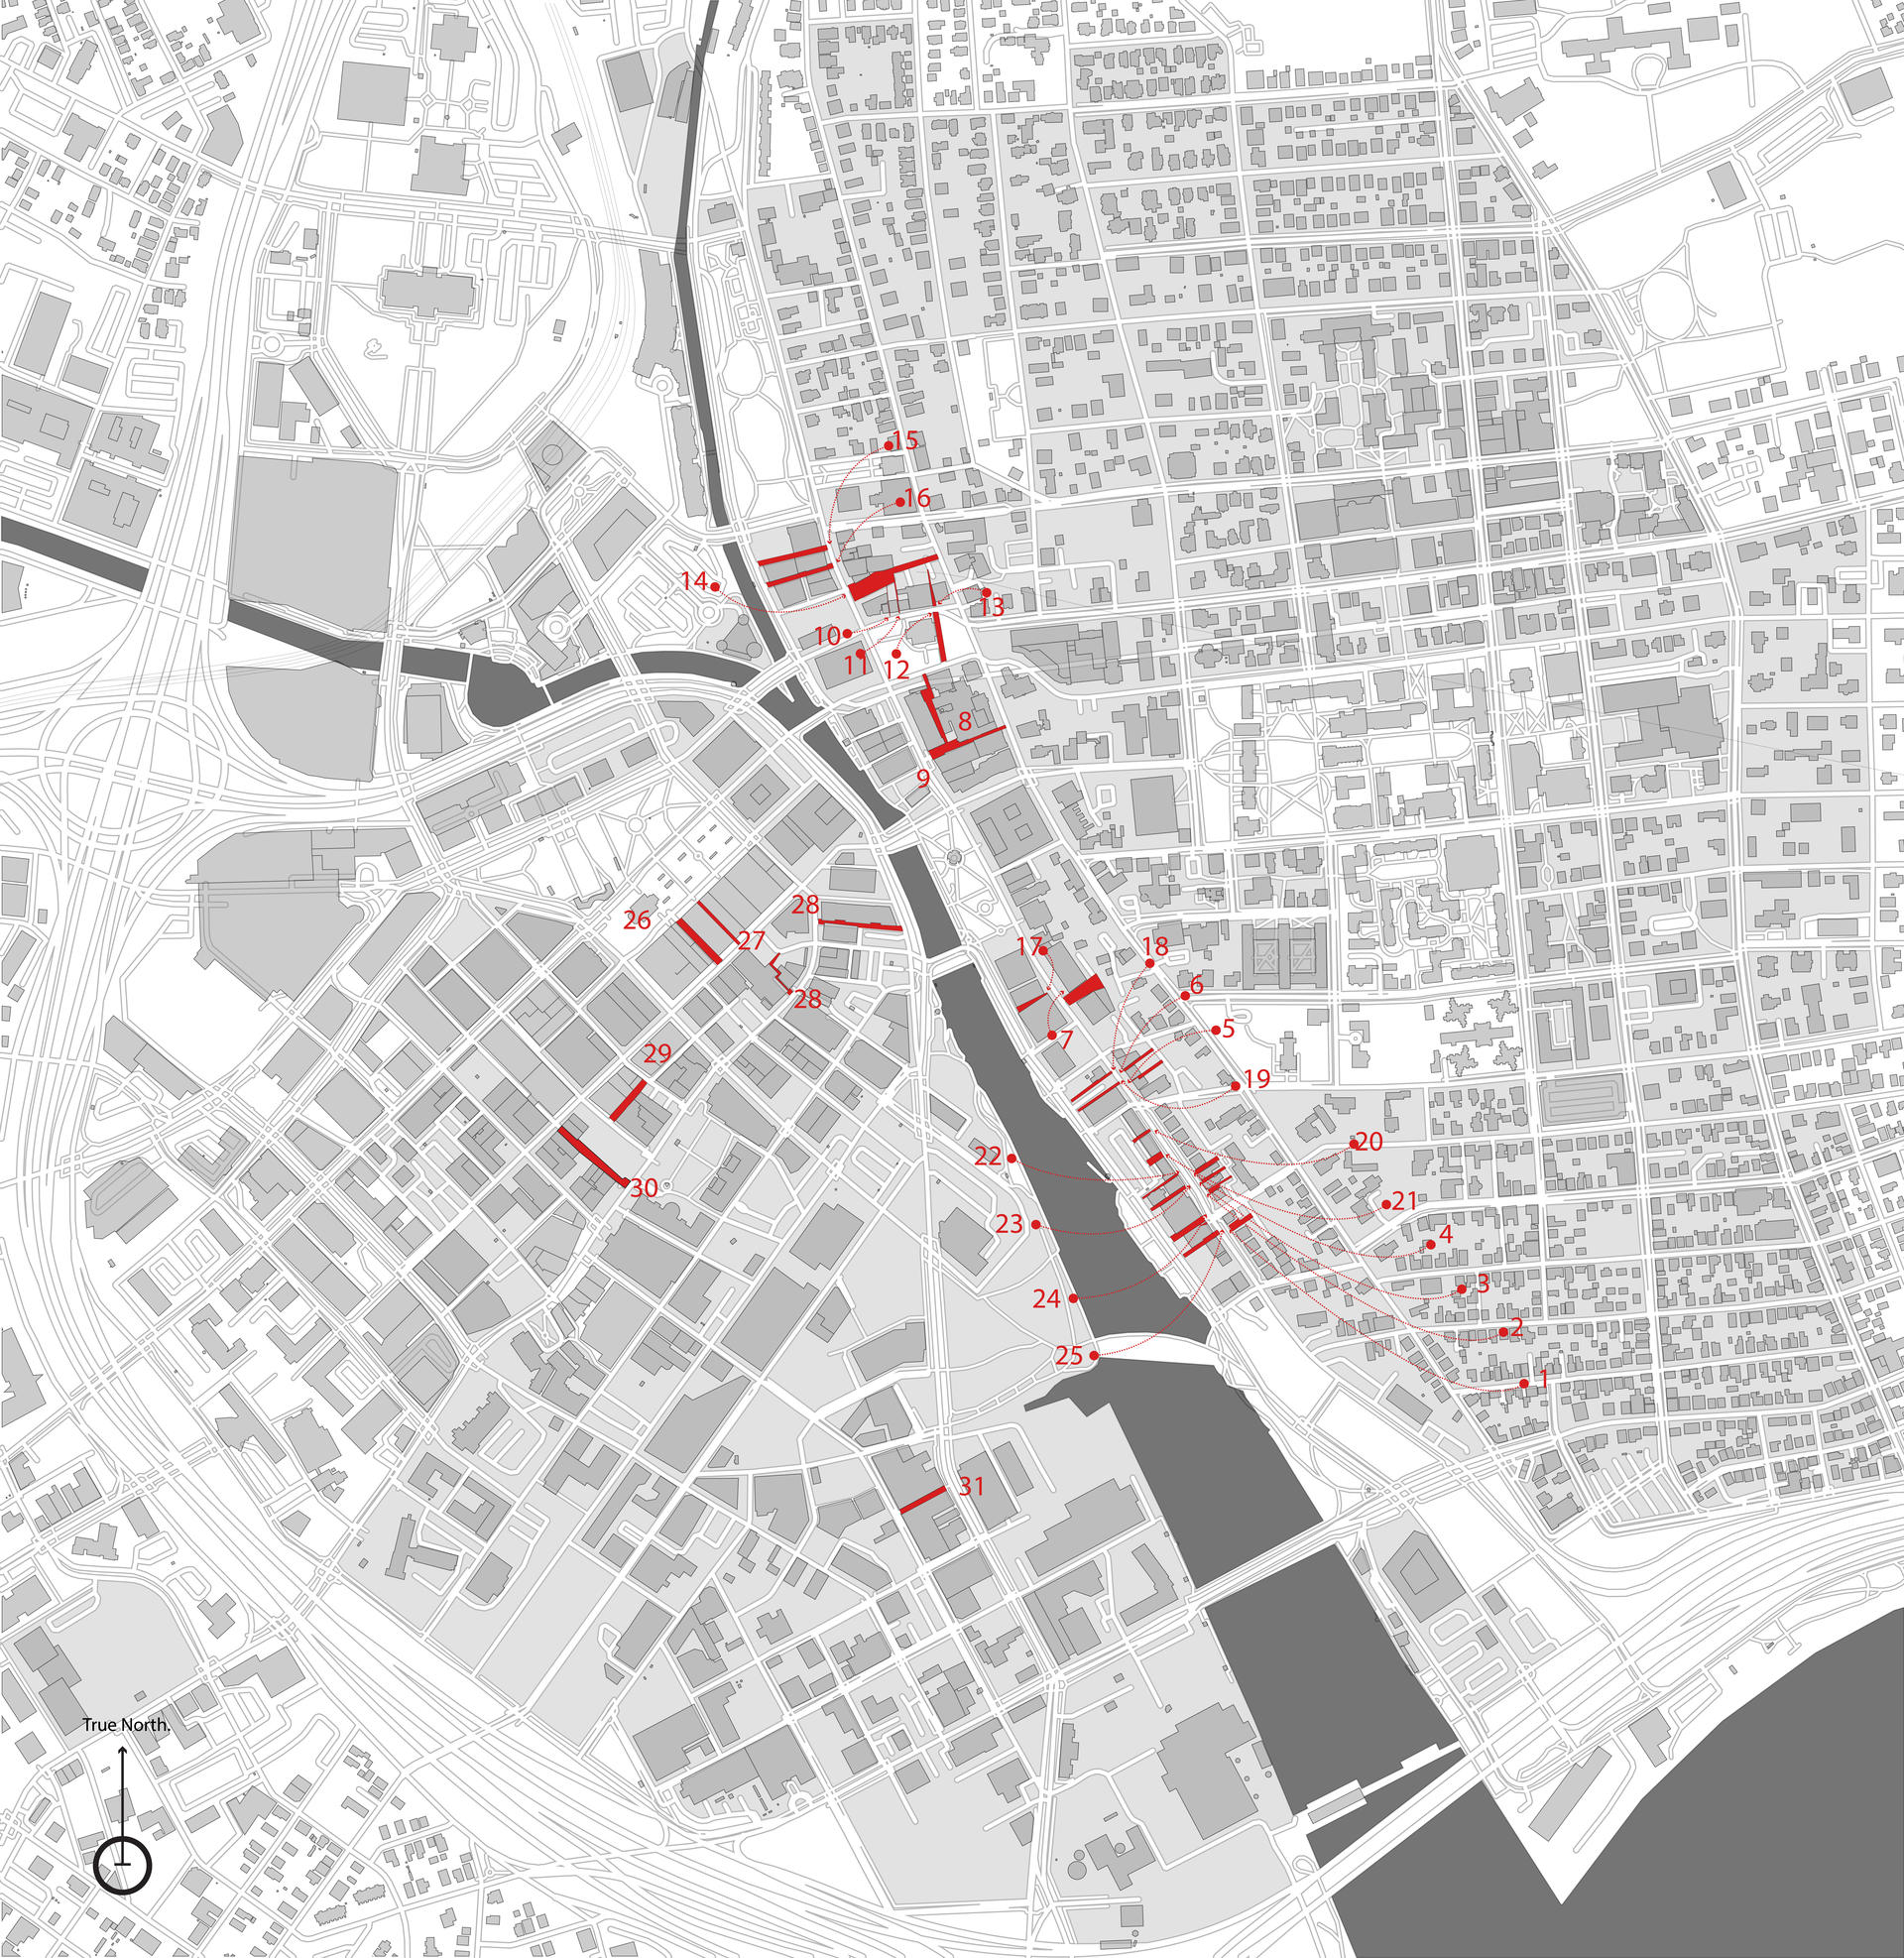 An 1:2000 map of the 30 potential sites marked in red with number